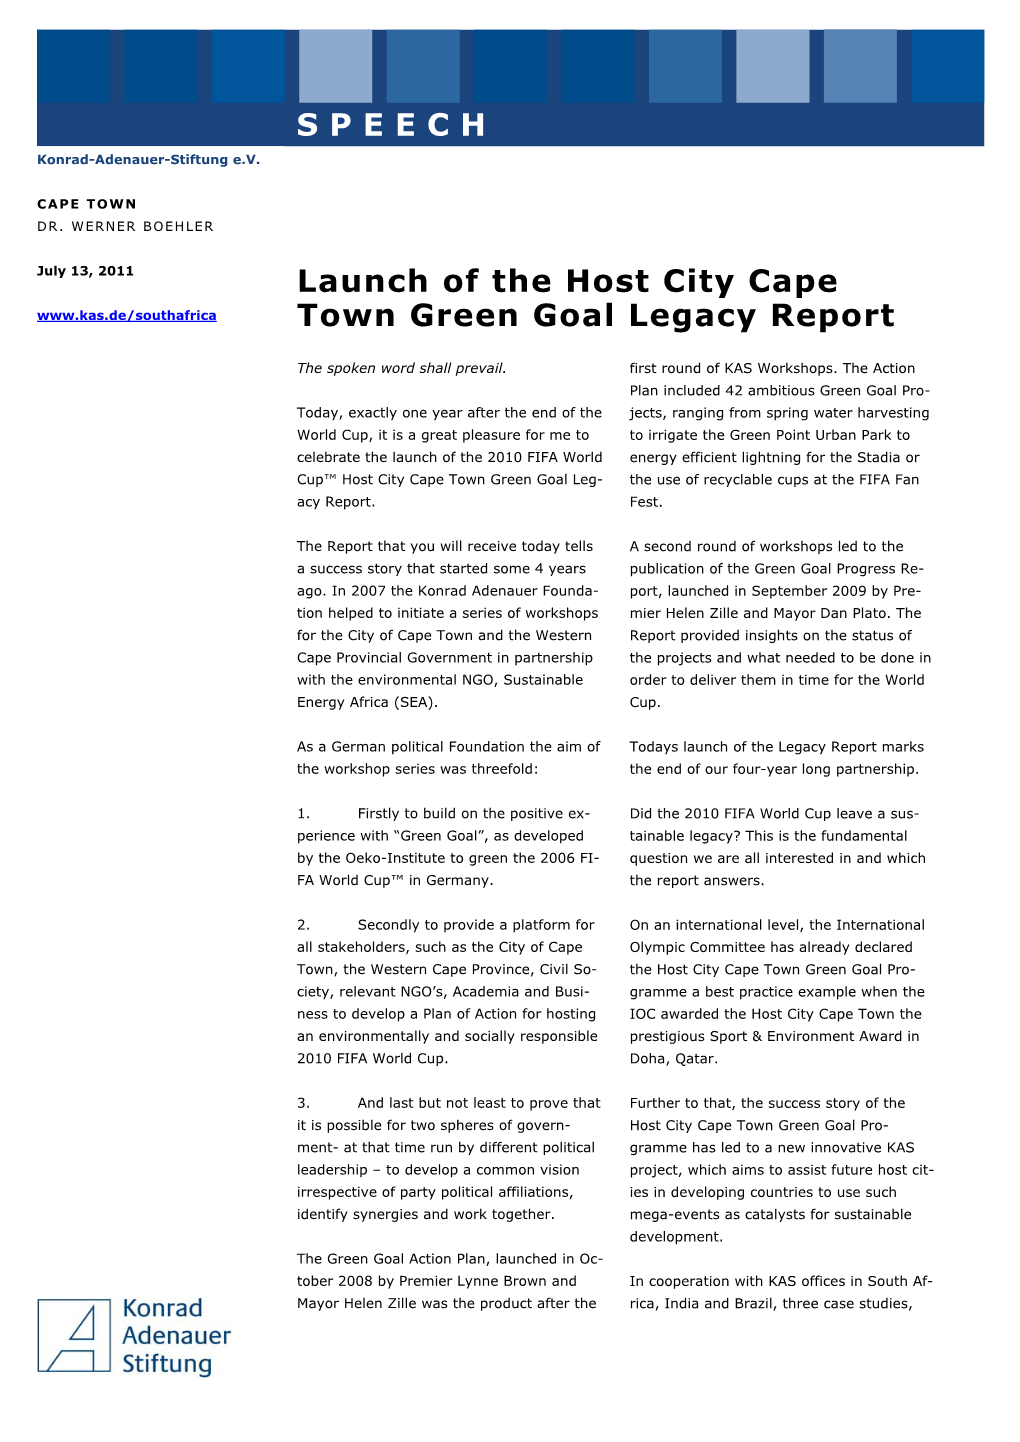 Launch of the Host City Cape Town Green Goal Legacy Report